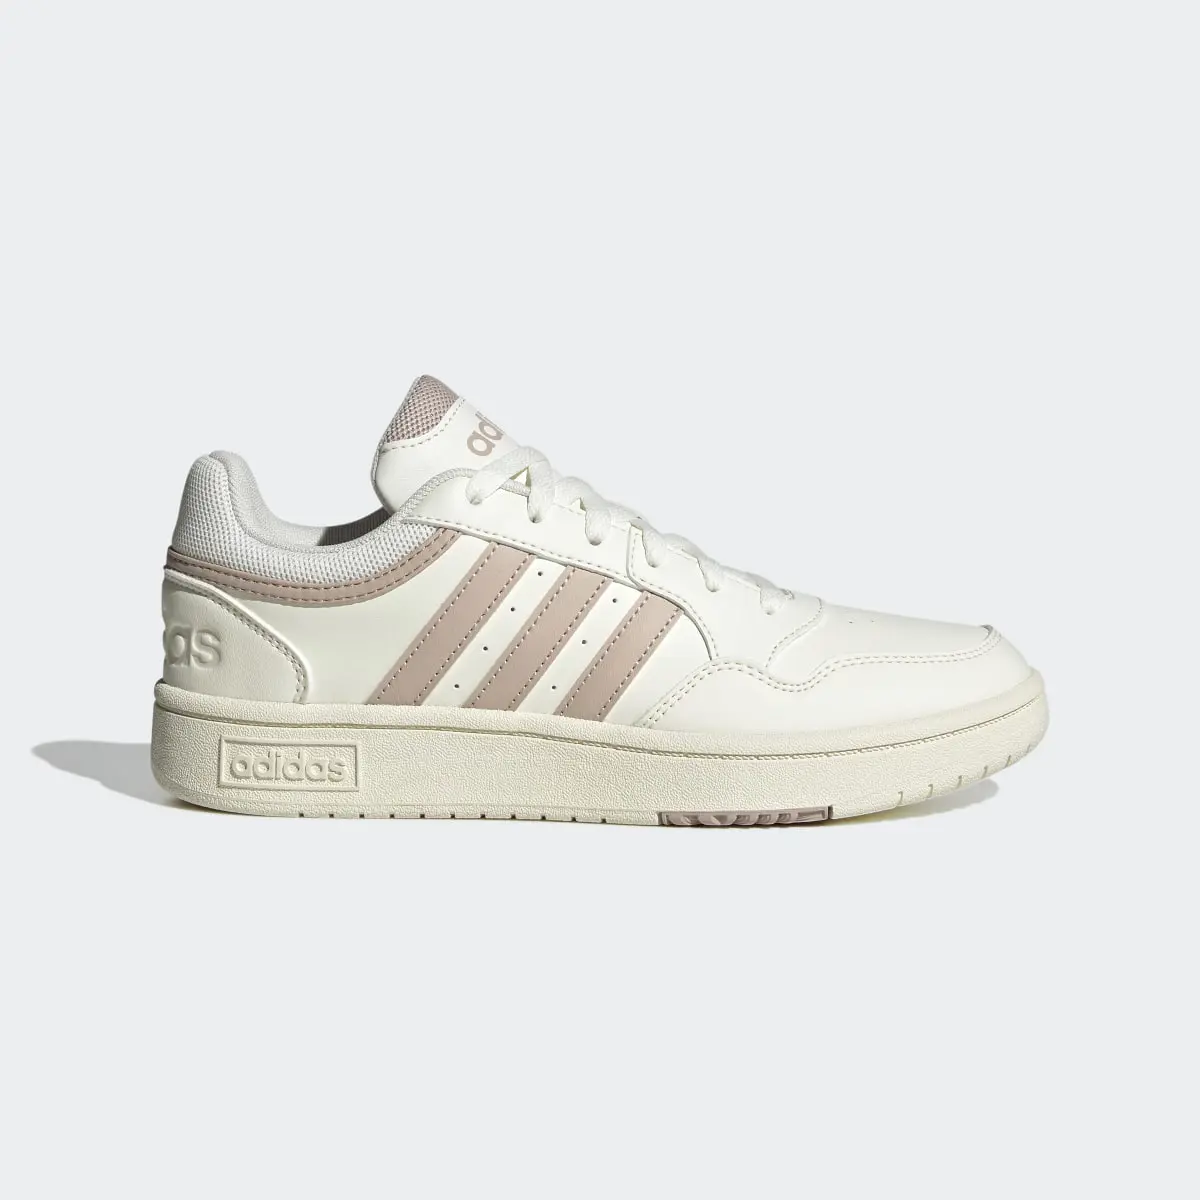 Adidas Hoops 3.0 Mid Lifestyle Basketball Low Shoes. 2